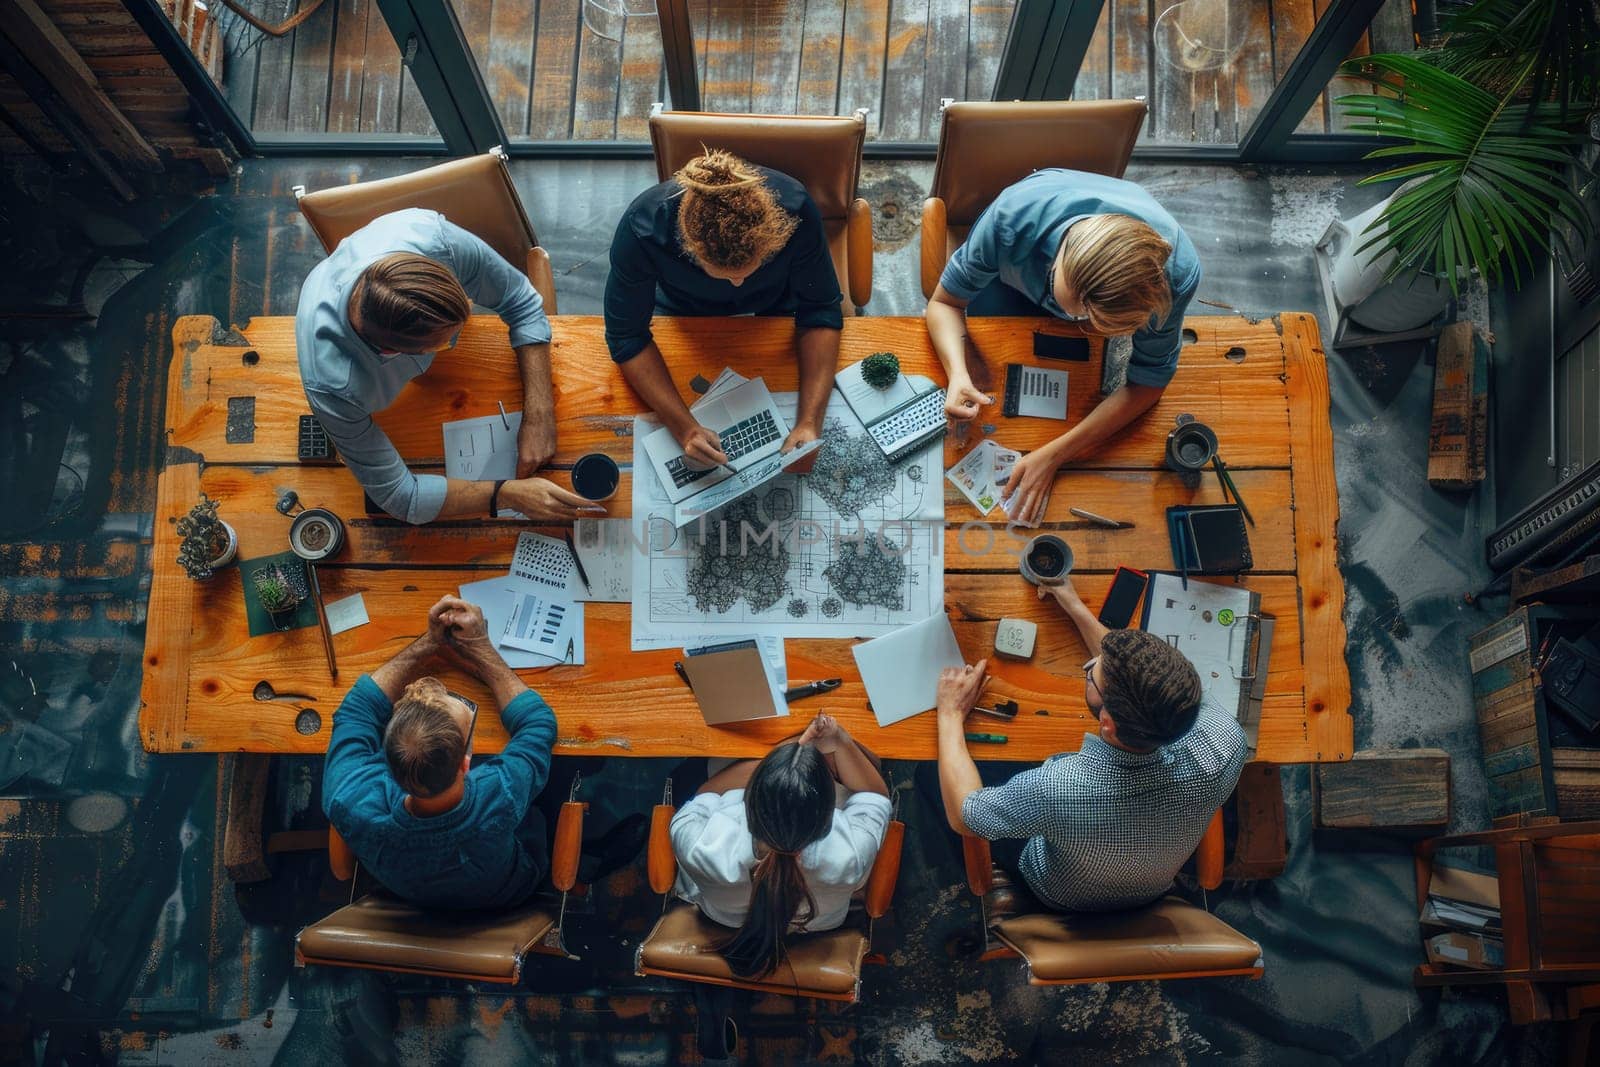 A group of people are sitting around a wooden table, working together on a project. The atmosphere is collaborative and focused, with everyone engaged in the task at hand